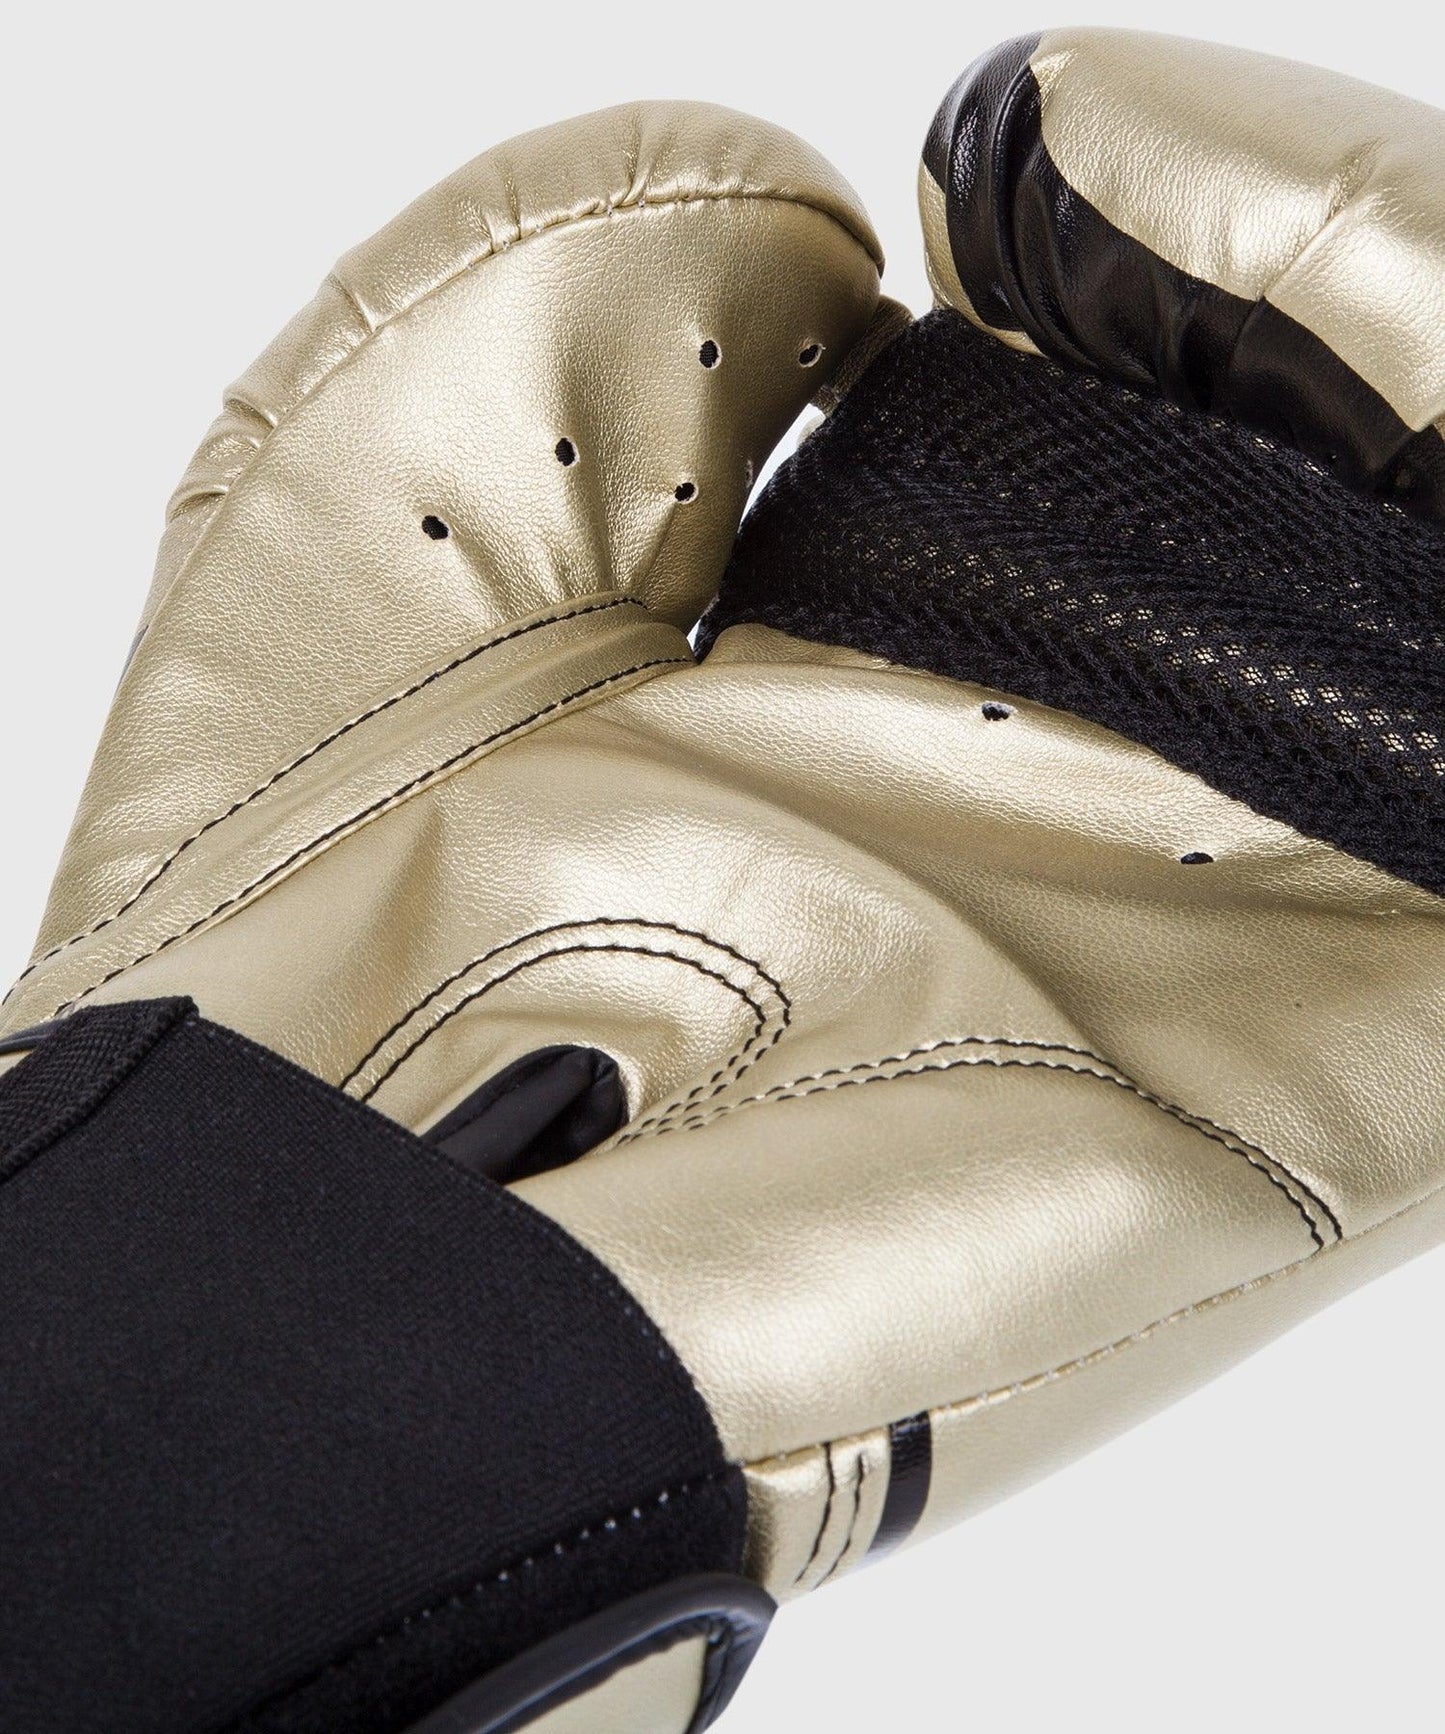 Venum Challenger 2.0 Boxing Gloves - Gold Picture 6